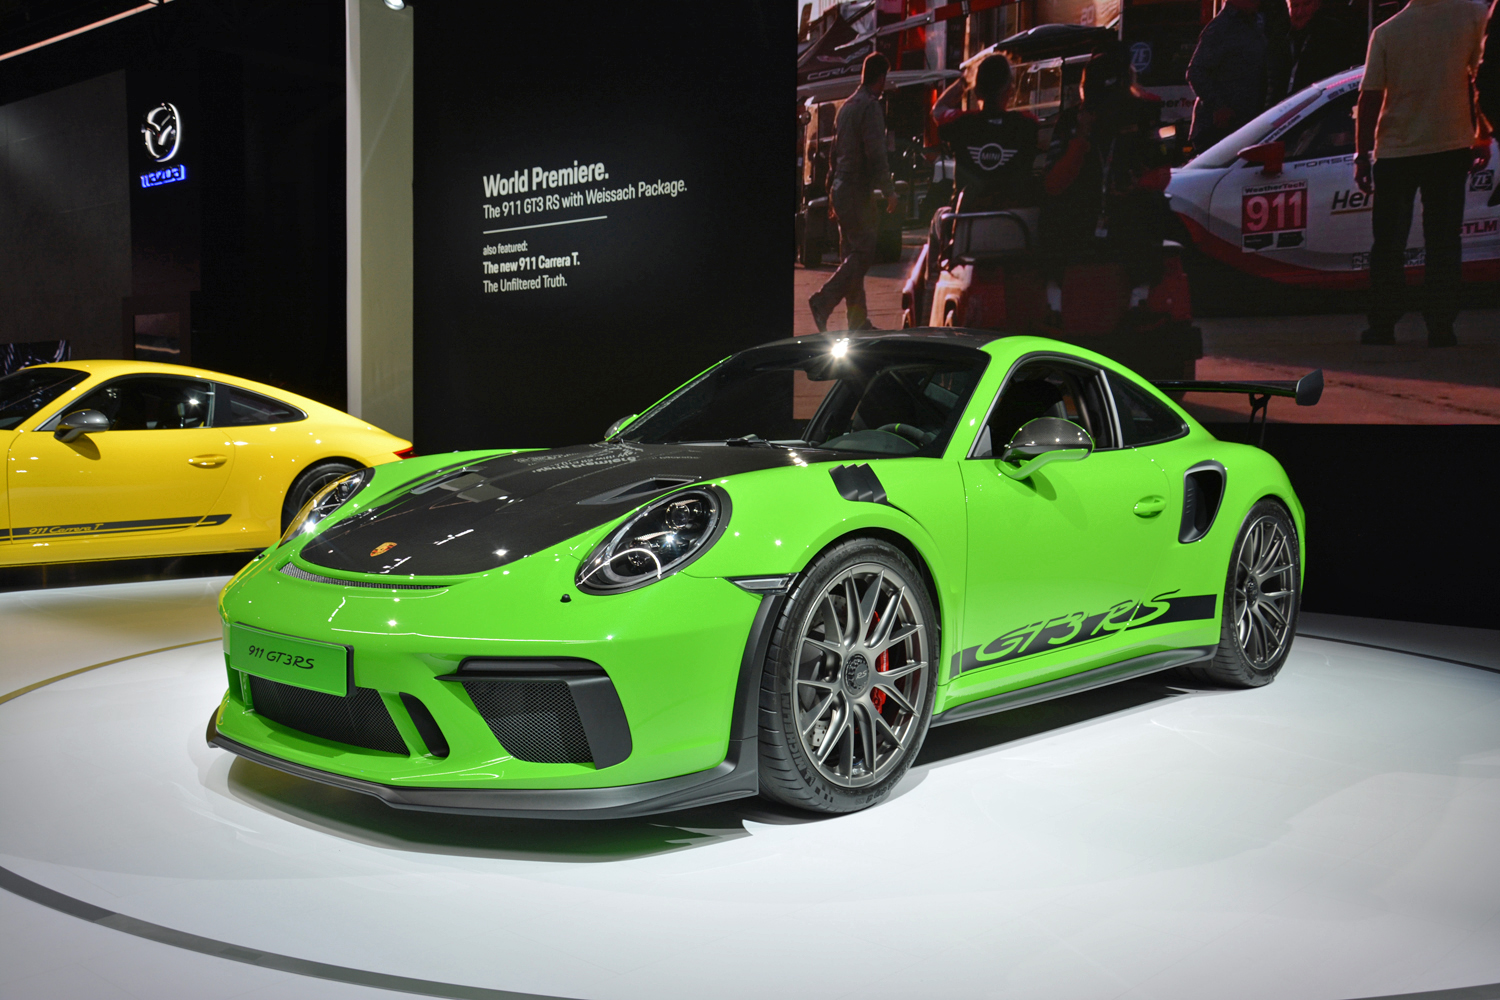 porsche insight into the 911 gt3 rs weissach package dt new york 2018 1